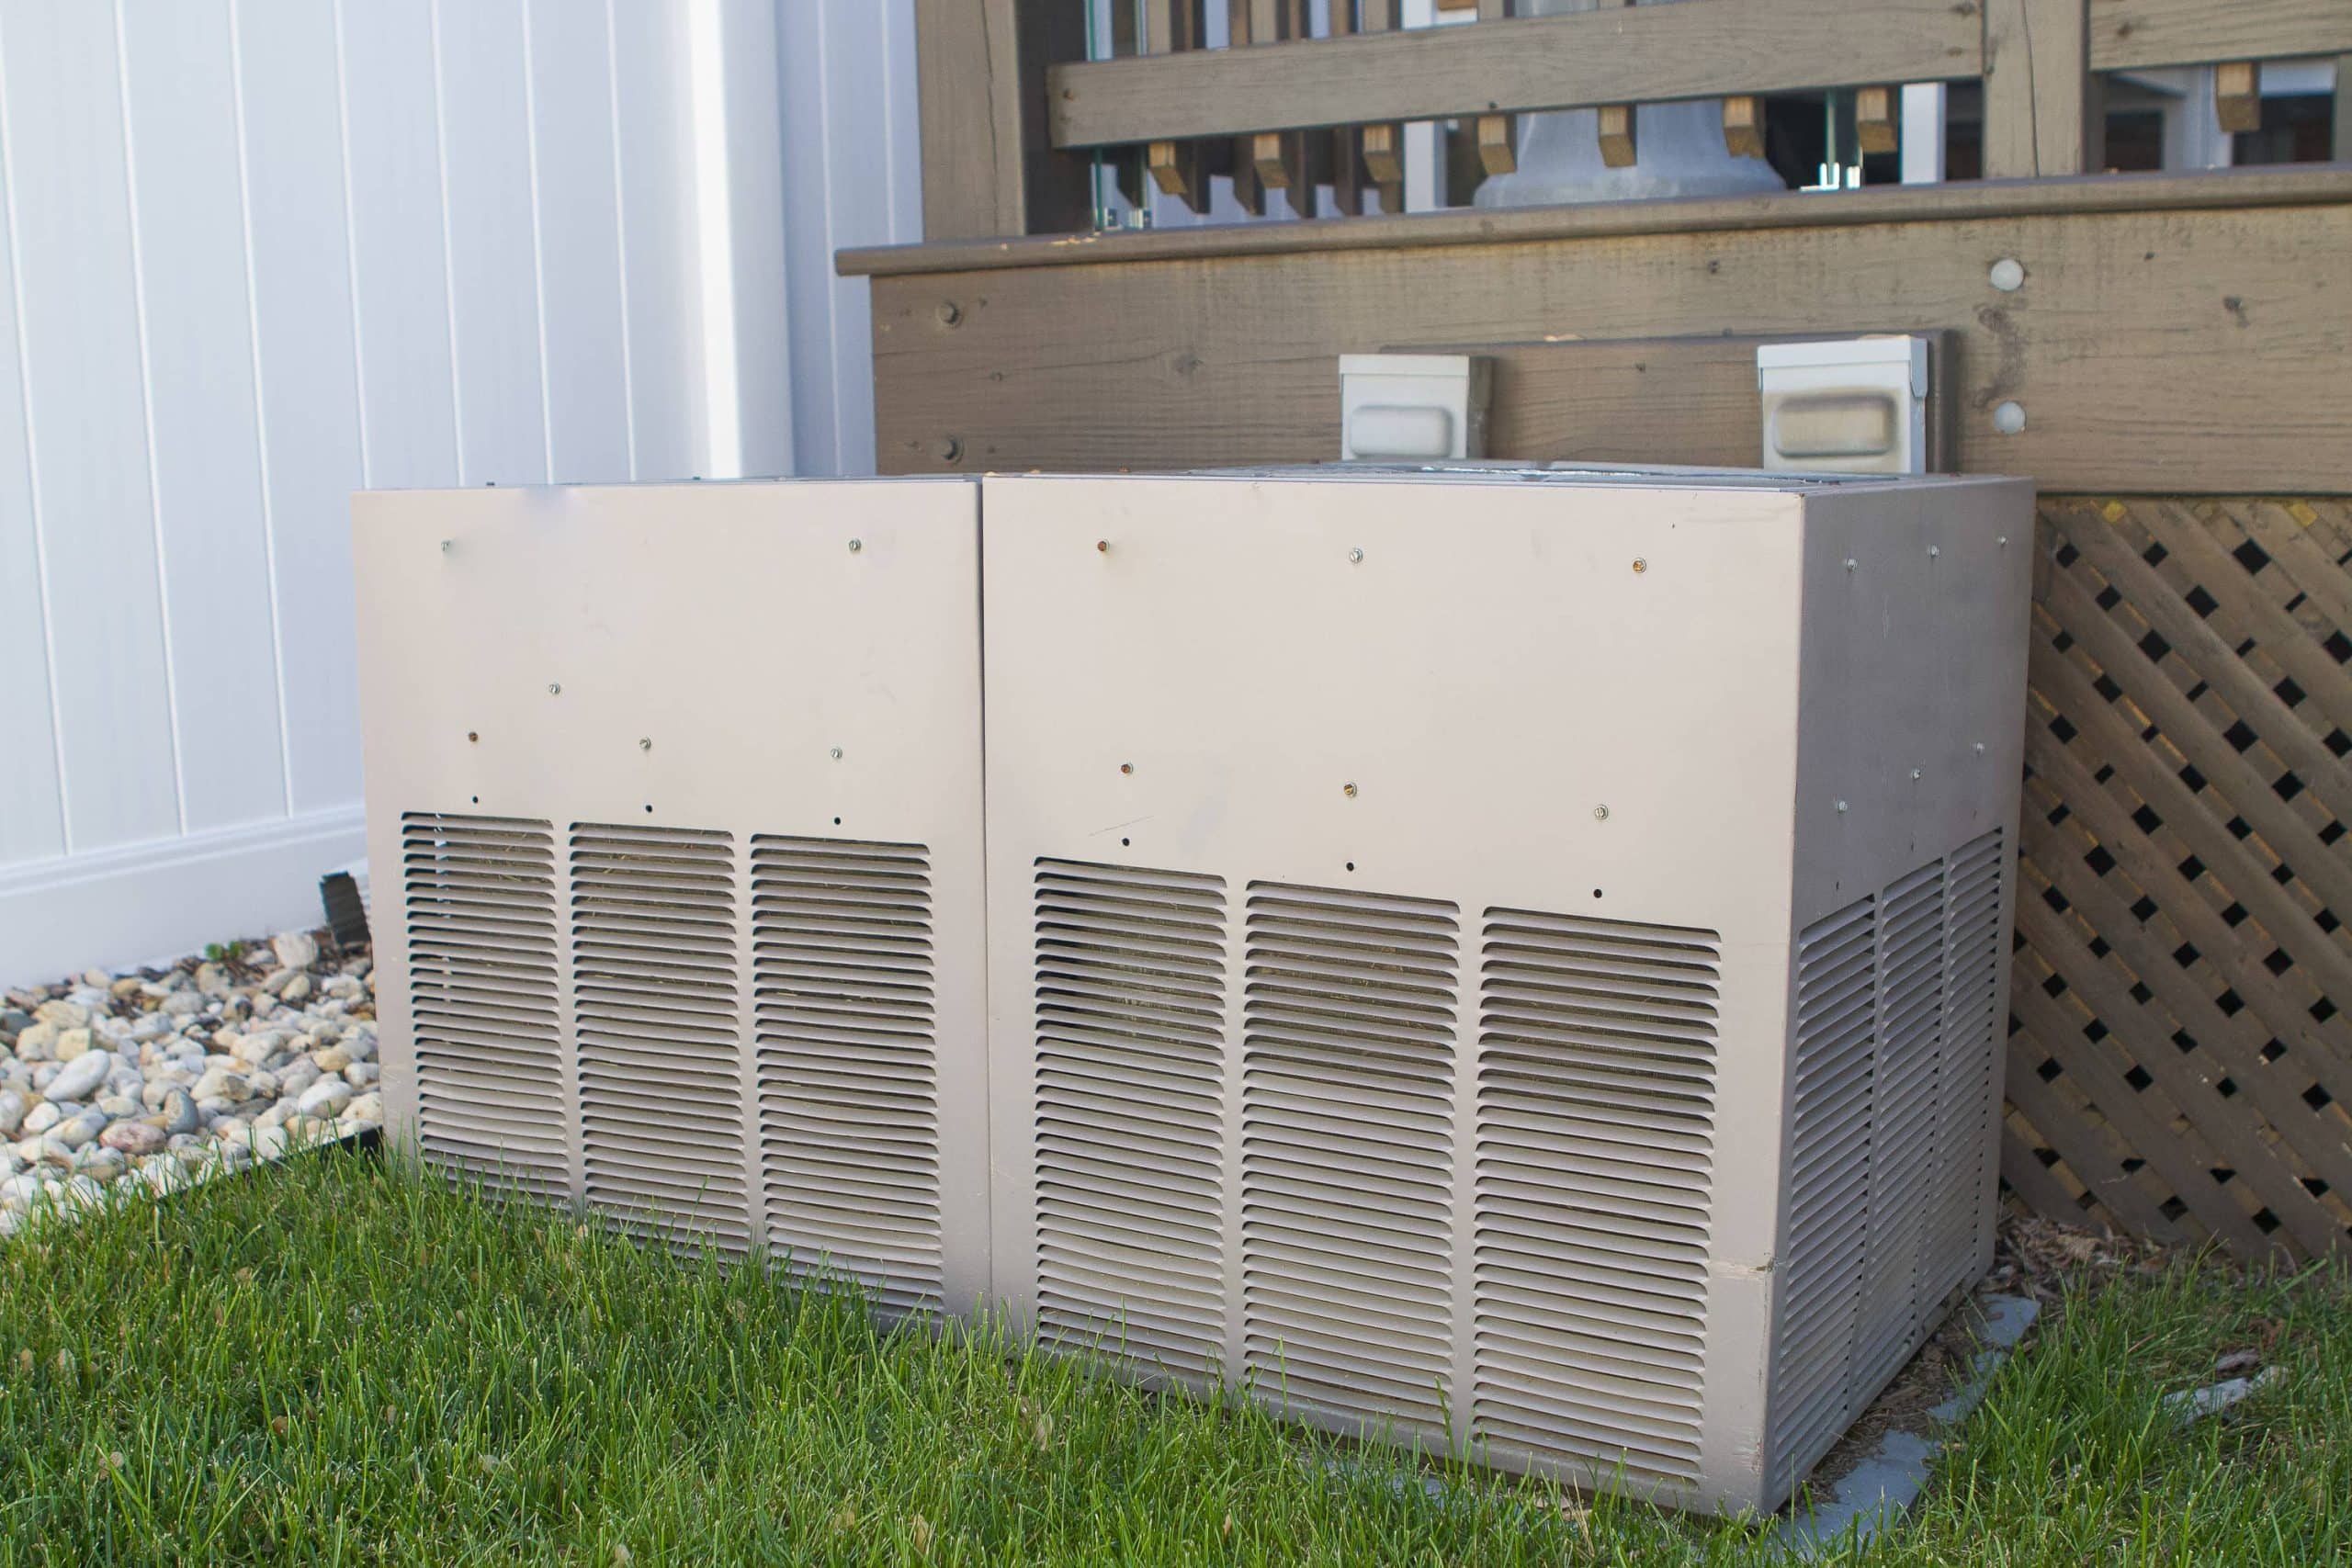 Our old air conditioners outside